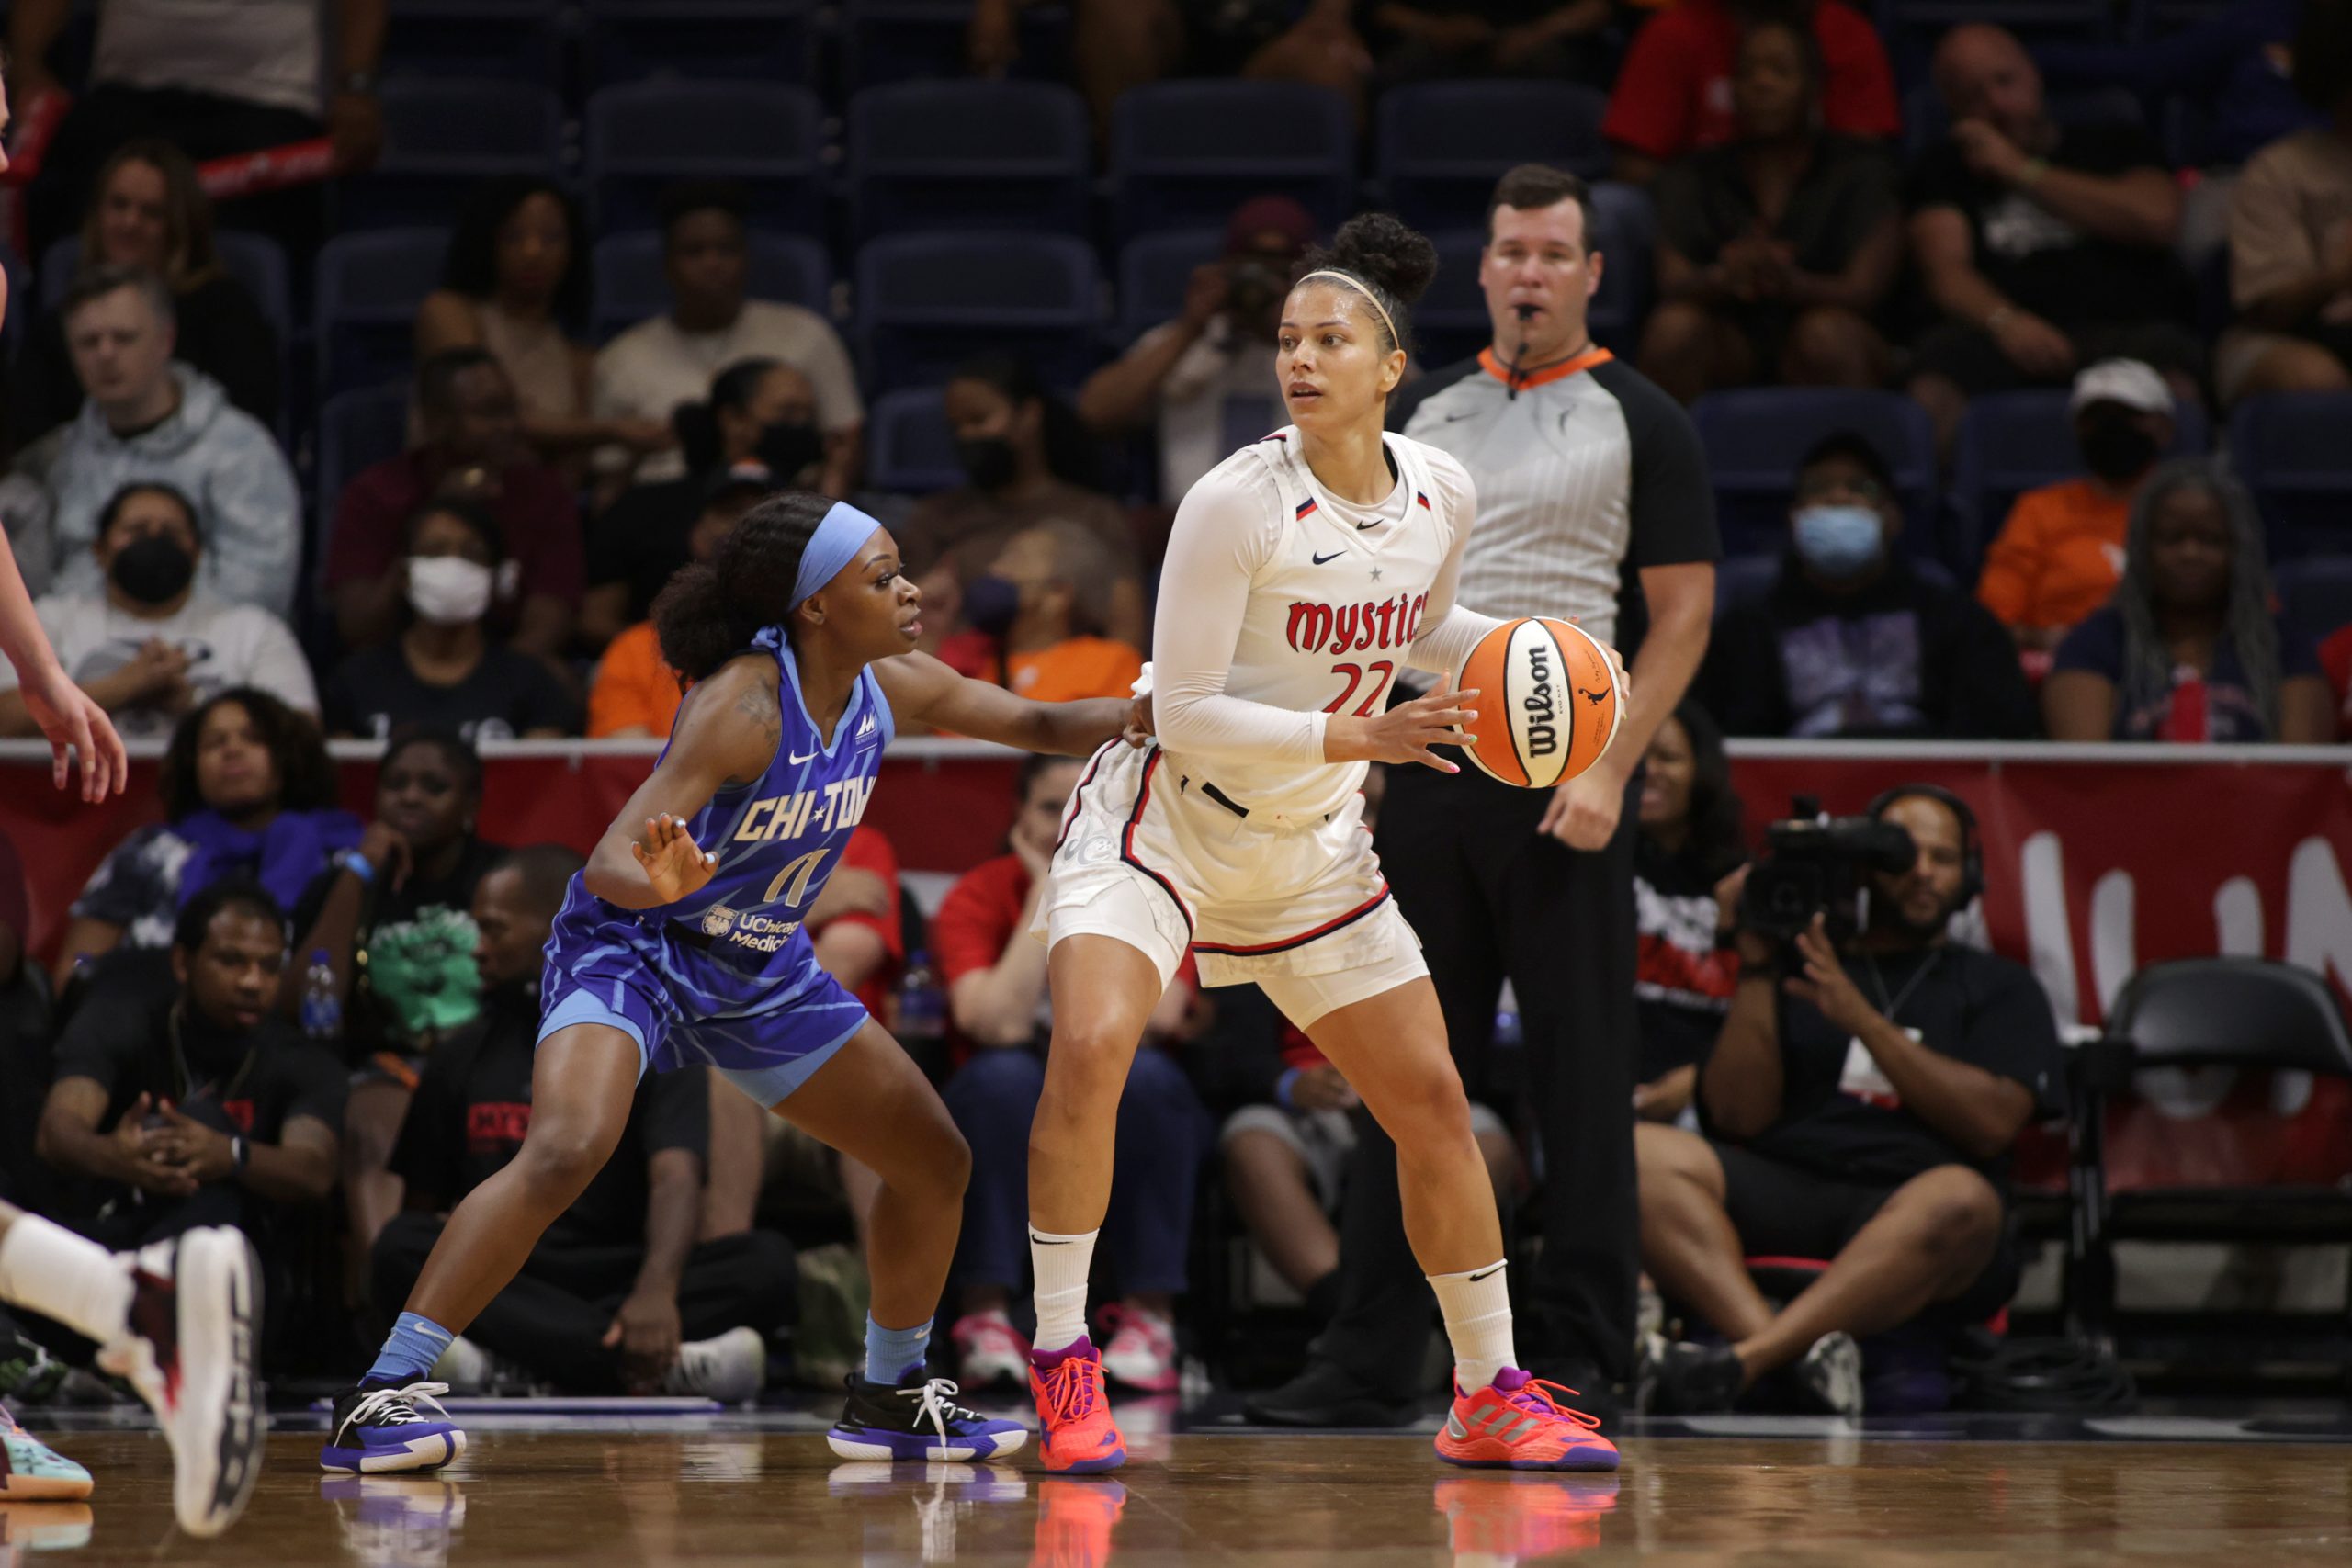 The Art of Growth: How Alysha Clark Persevered Through it All to Make Her Return to the Mystics